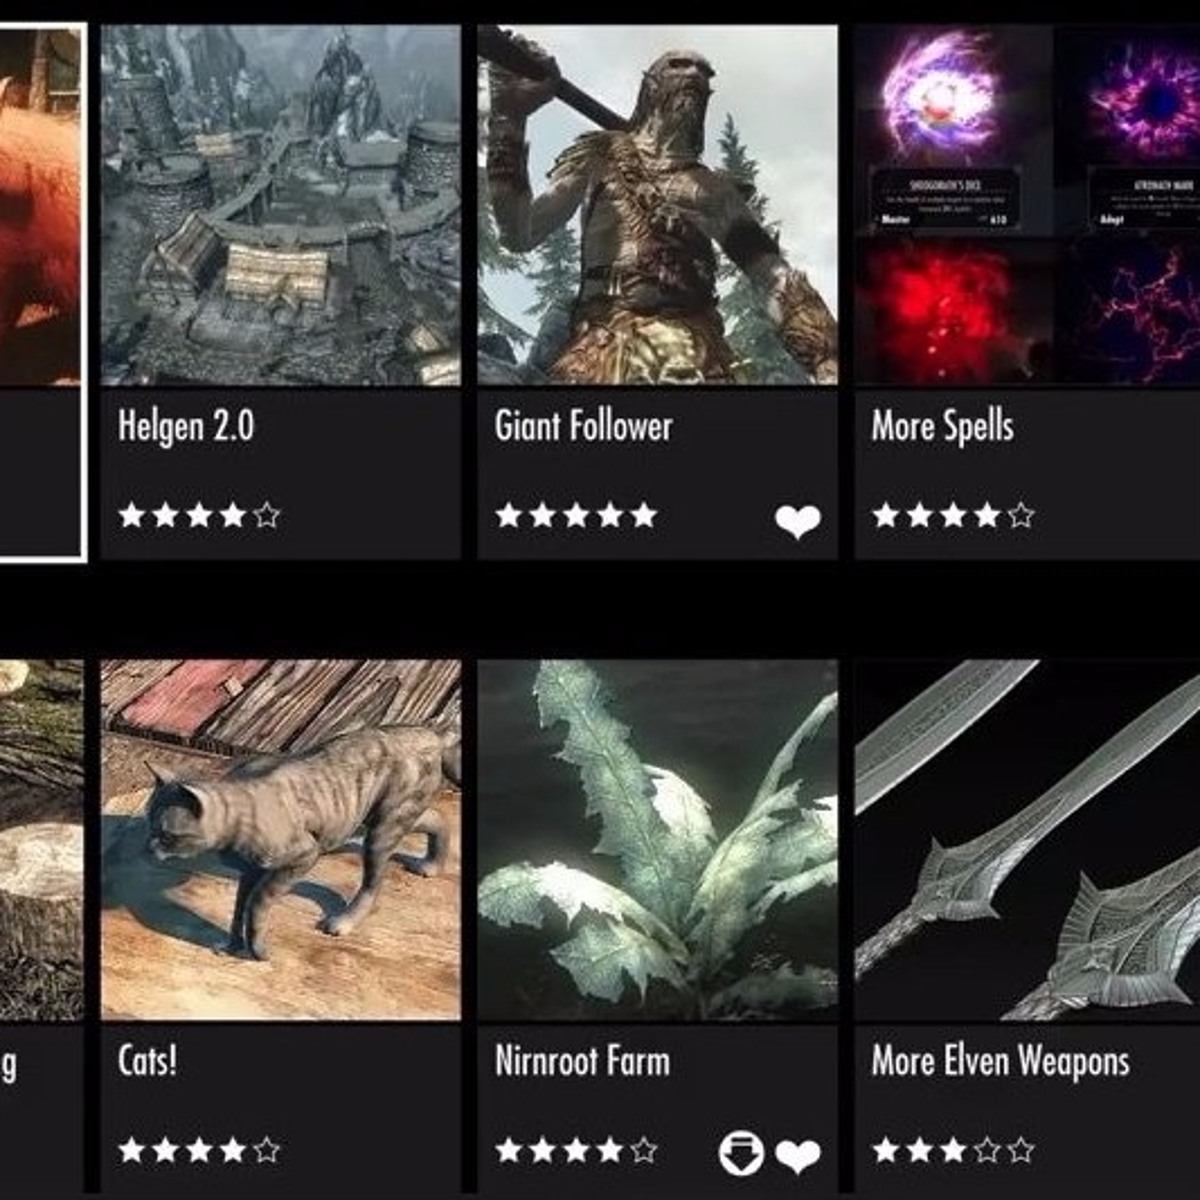 Skyrim mods on Xbox One, PC - How to install mods in Special Edition release | Eurogamer.net